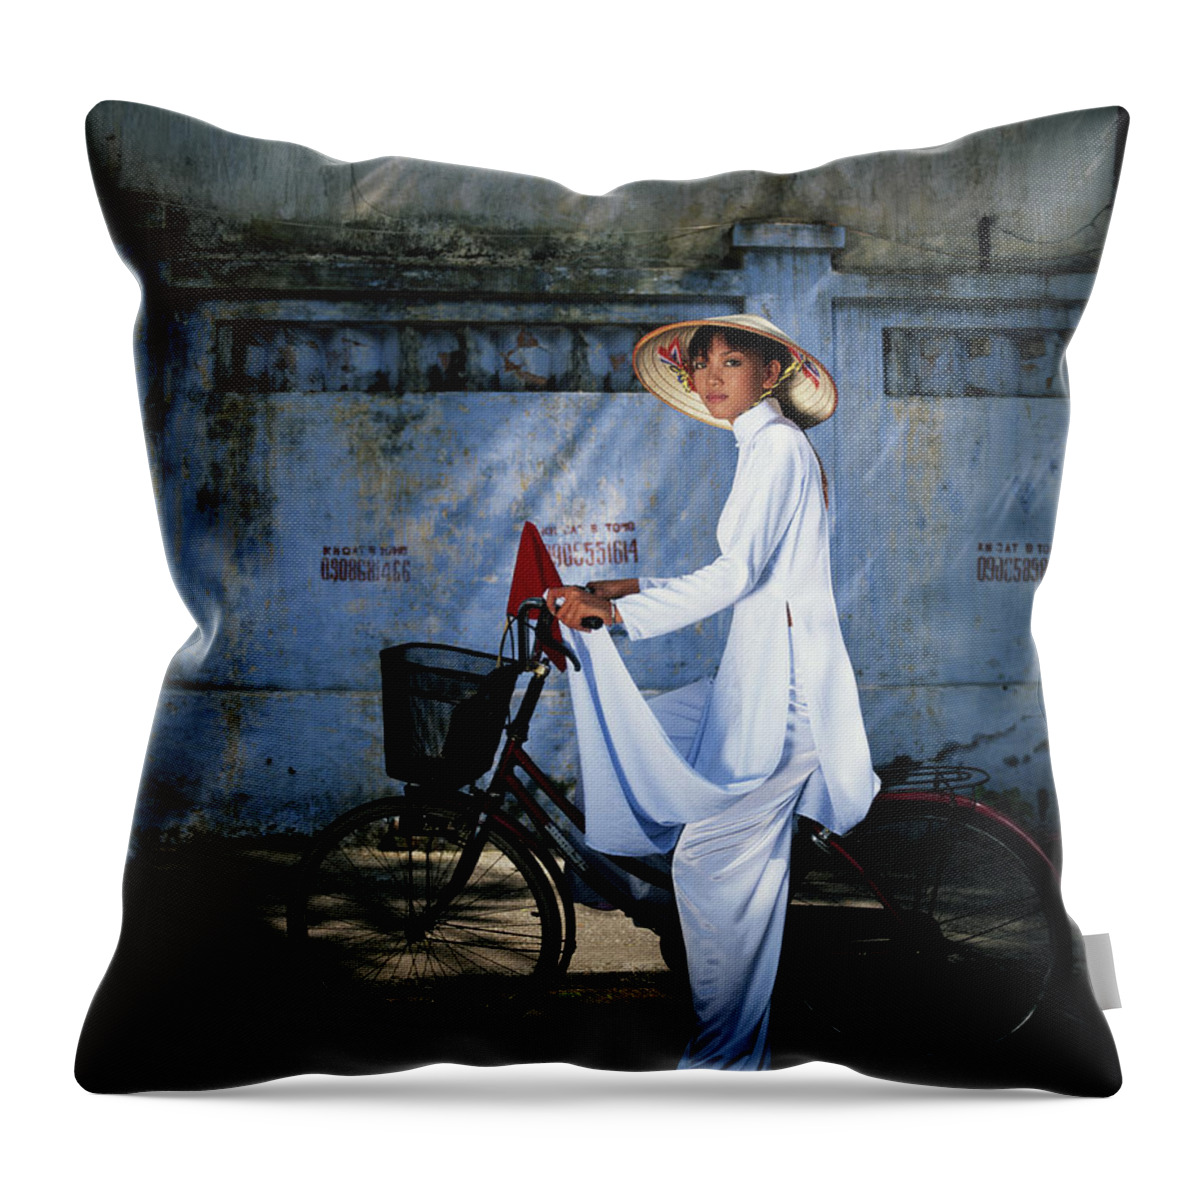 Ho Chi Minh City Throw Pillow featuring the photograph Young Woman Astride Bicycle, Portrait by Buena Vista Images